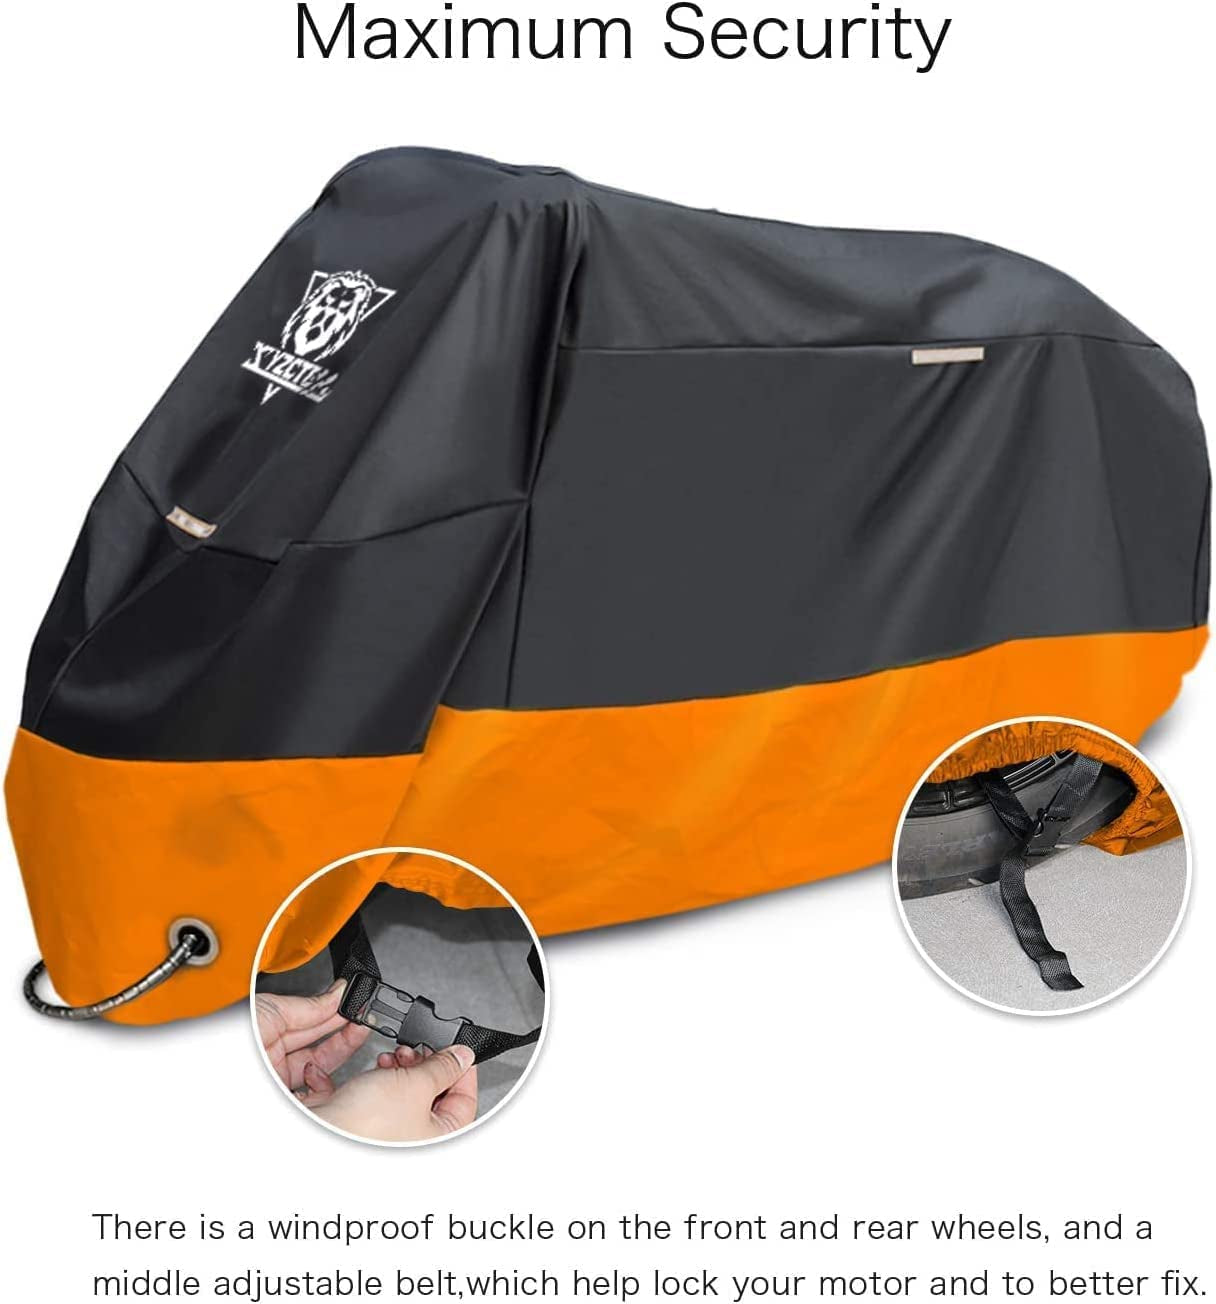 Motorcycle Cover – All Season Waterproof Outdoor Protection – Precision Fit up to 96 Inch Tour Bikes, Choppers and Cruisers – Protect against Dust, Debris, Rain and Weather(Xl,Black& Orange)